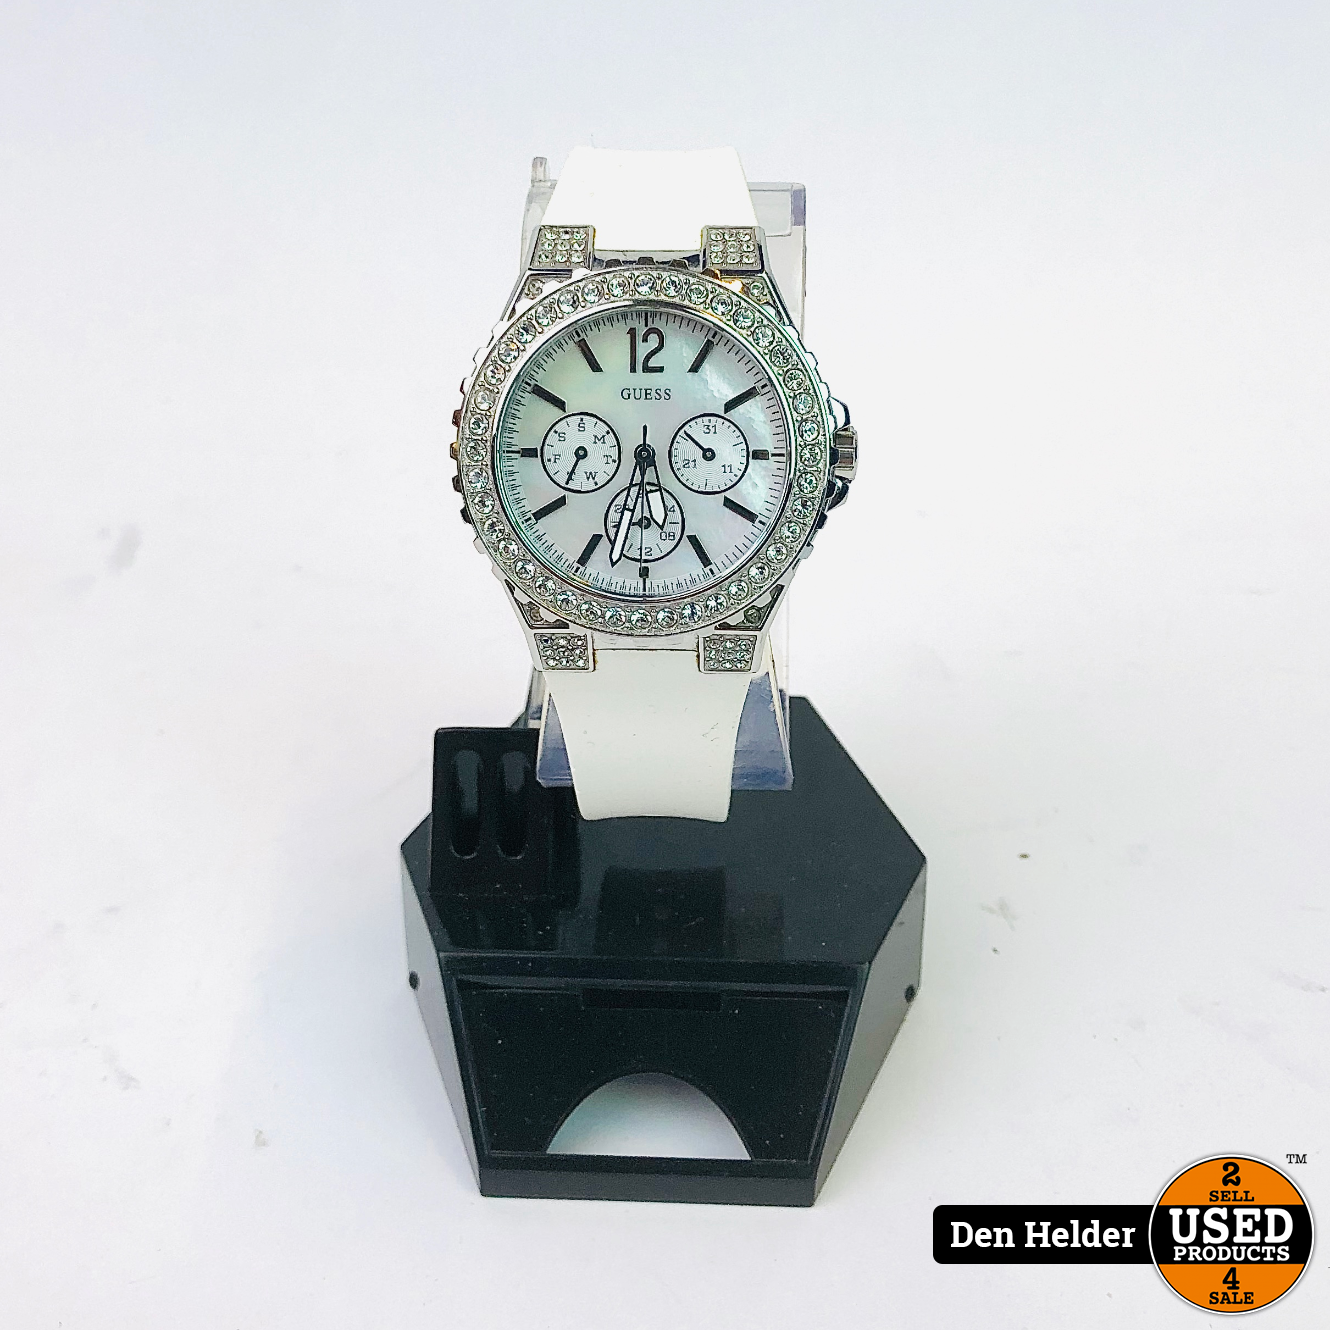 Geuss Guess W14555L1 Horloge - In Staat - Used Products Den Helder